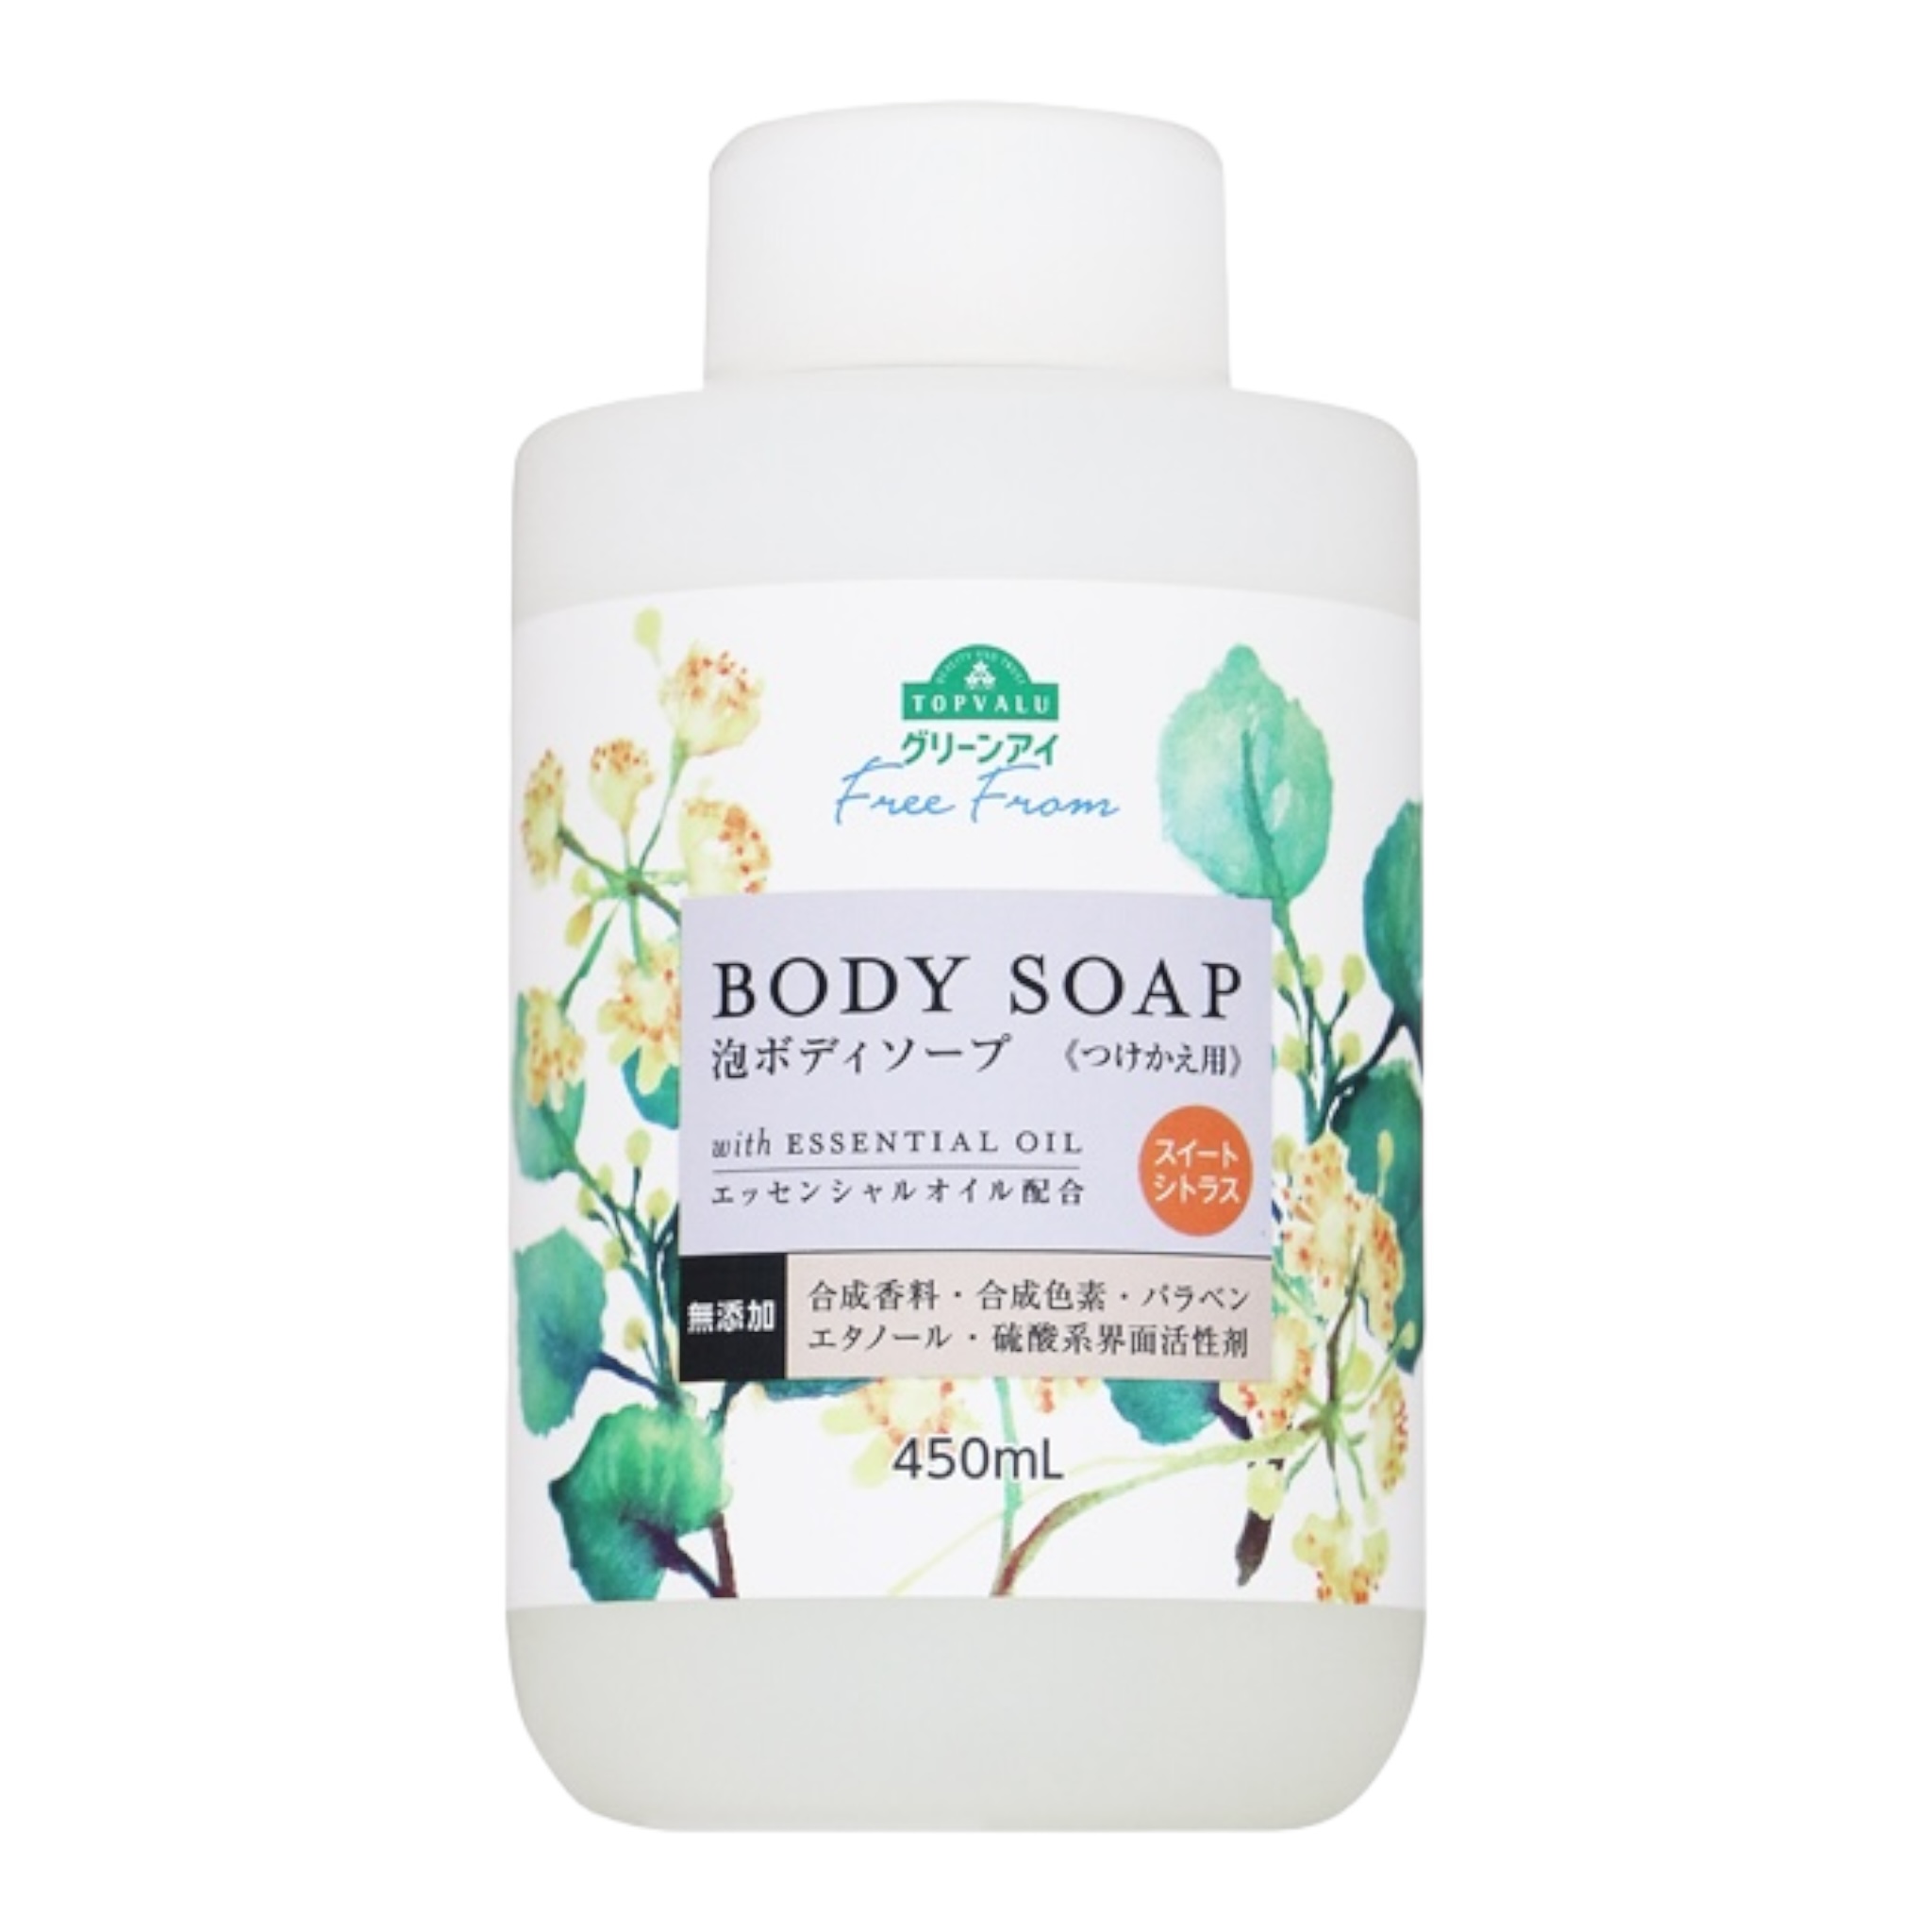 Free From BODY SOAP with ESSENTIAL OILスイートシトラス(トップバリュFF泡ボディソープCT )